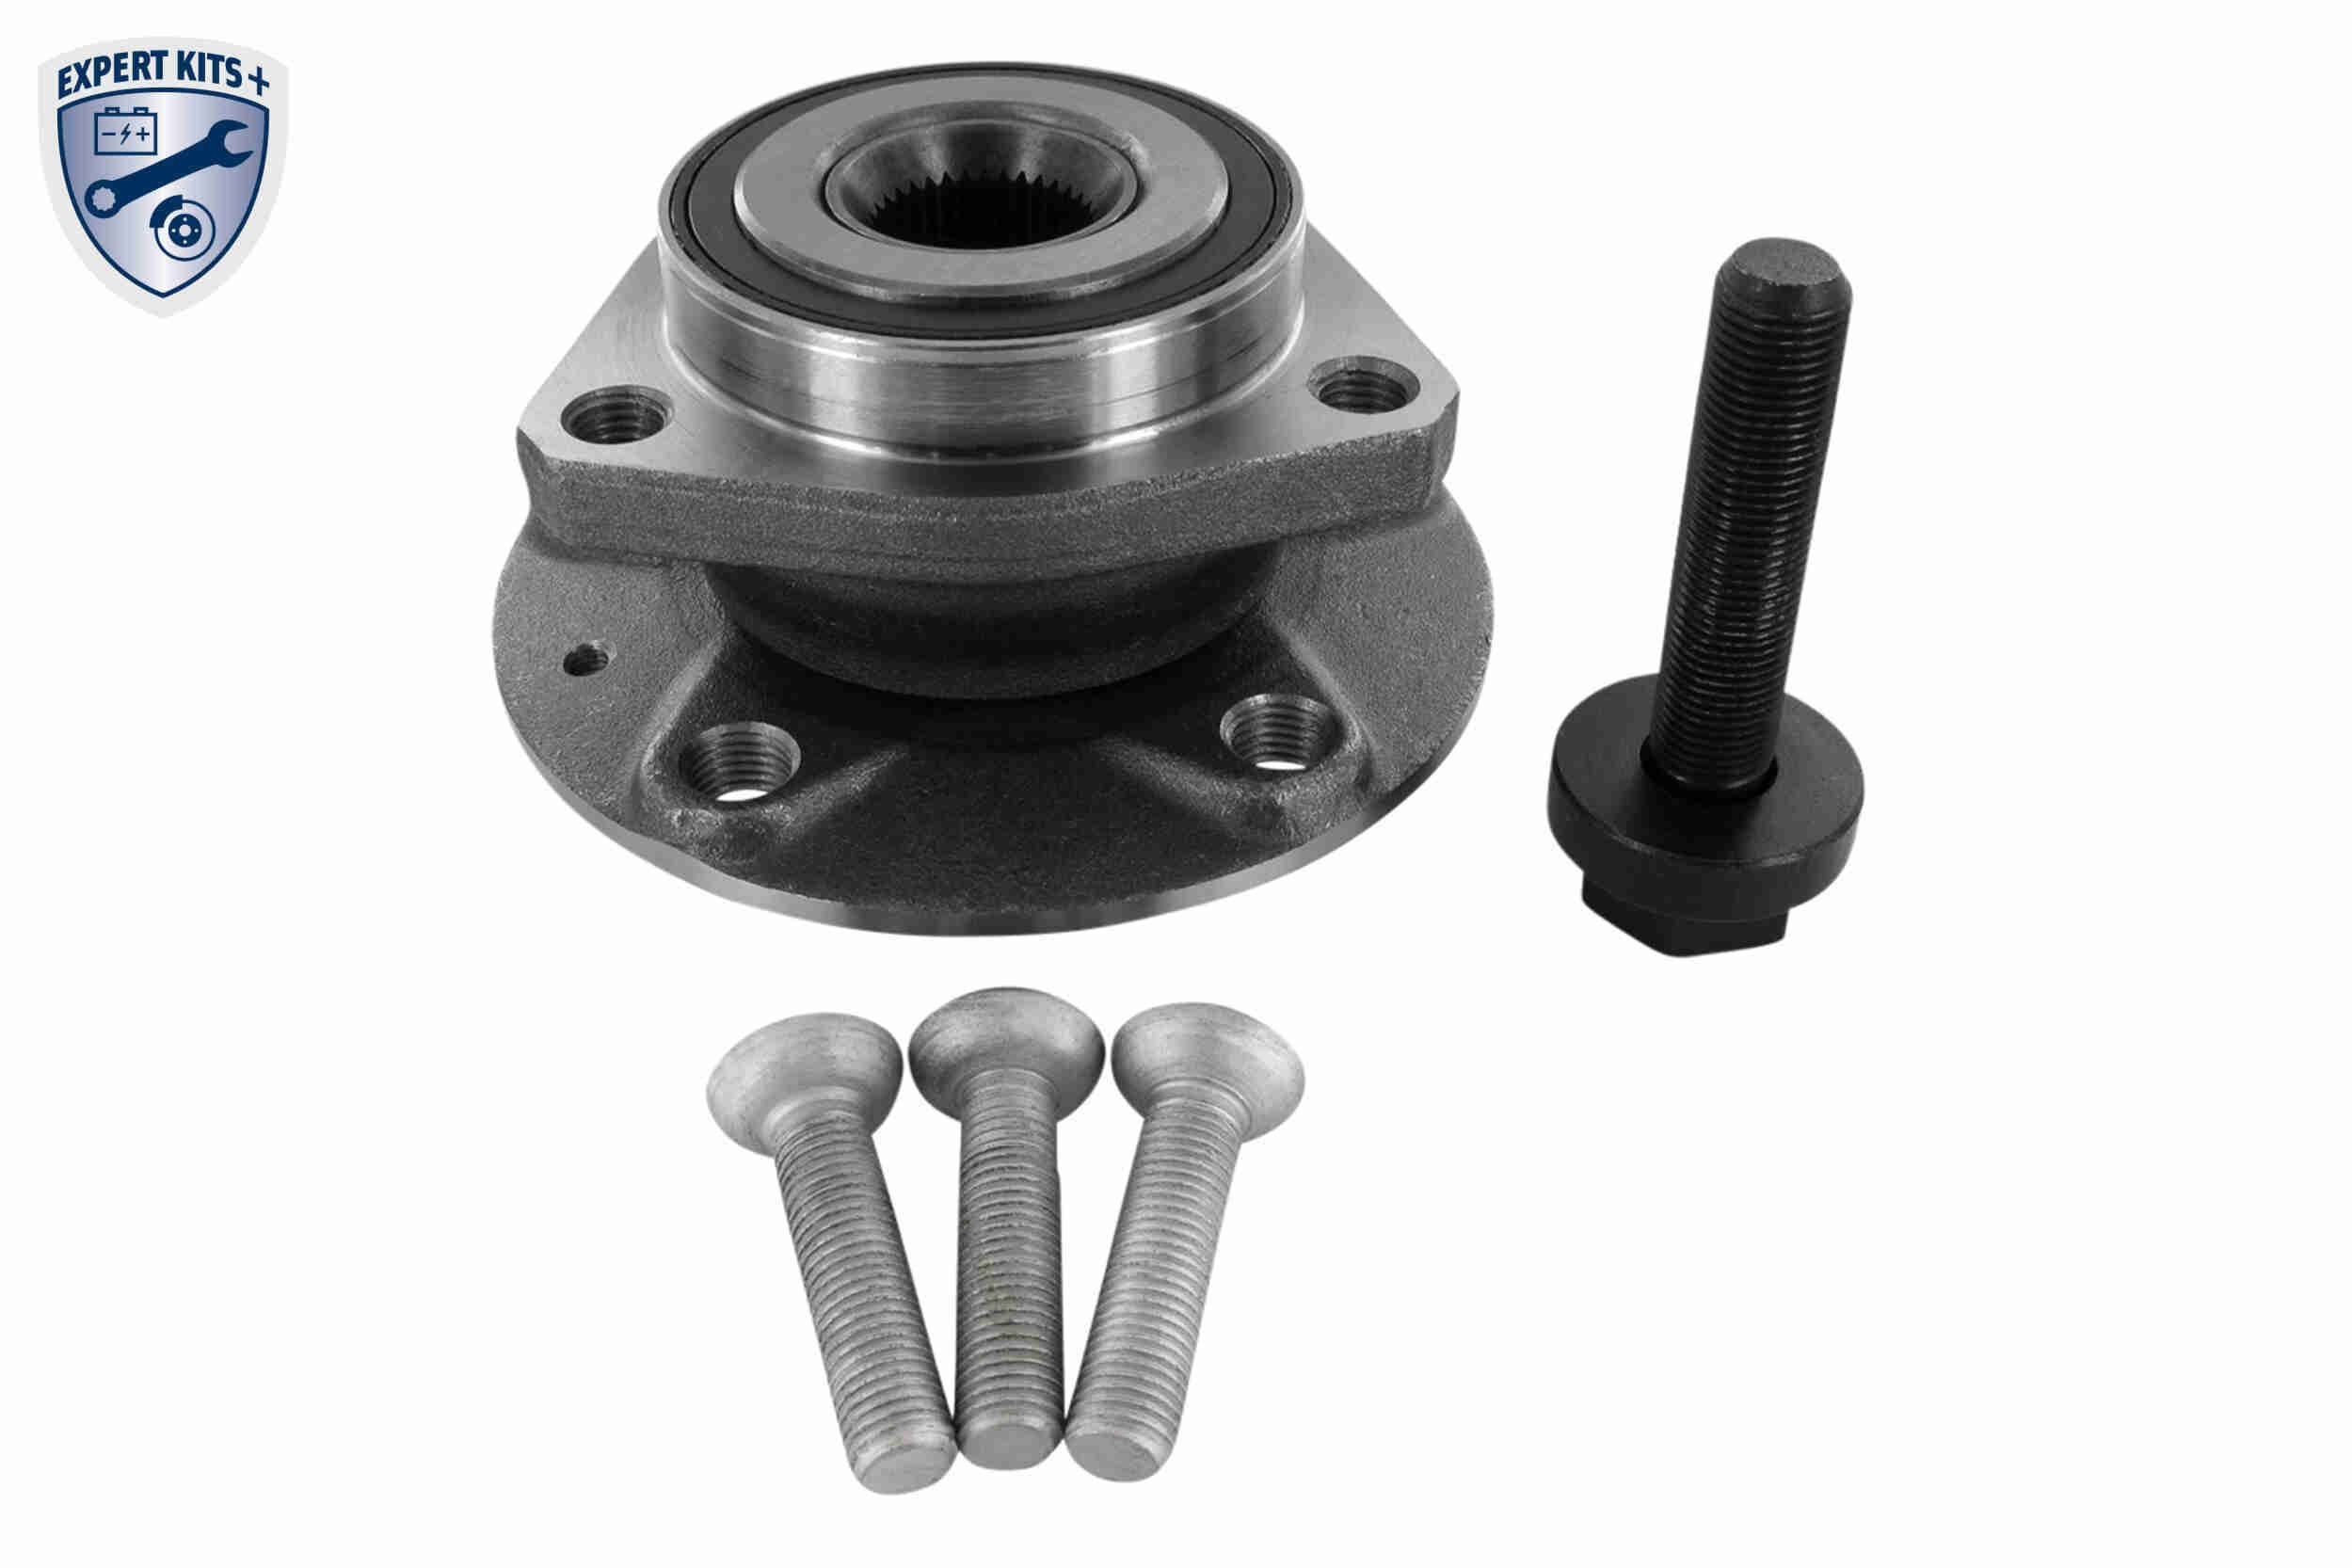 VAICO V10-8546 Wheel bearing kit Front Axle, with attachment material, EXPERT KITS +, with integrated magnetic sensor ring, 137, 80, 136,5 mm